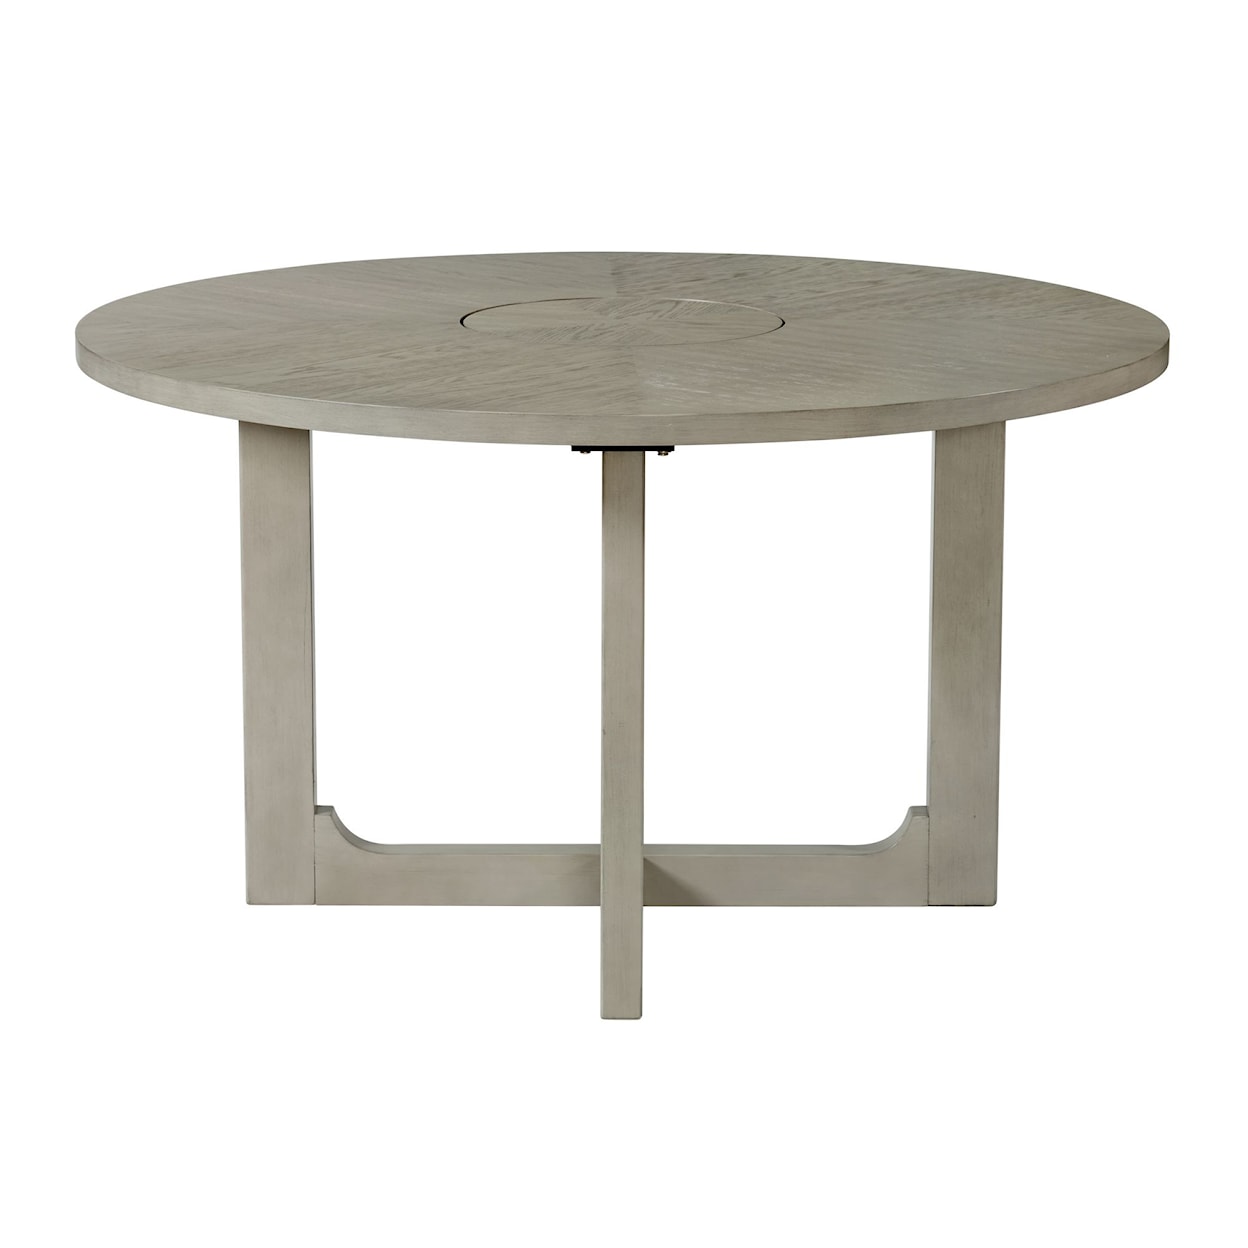 Elements International Marly Round Dining Table with Lazy Susan